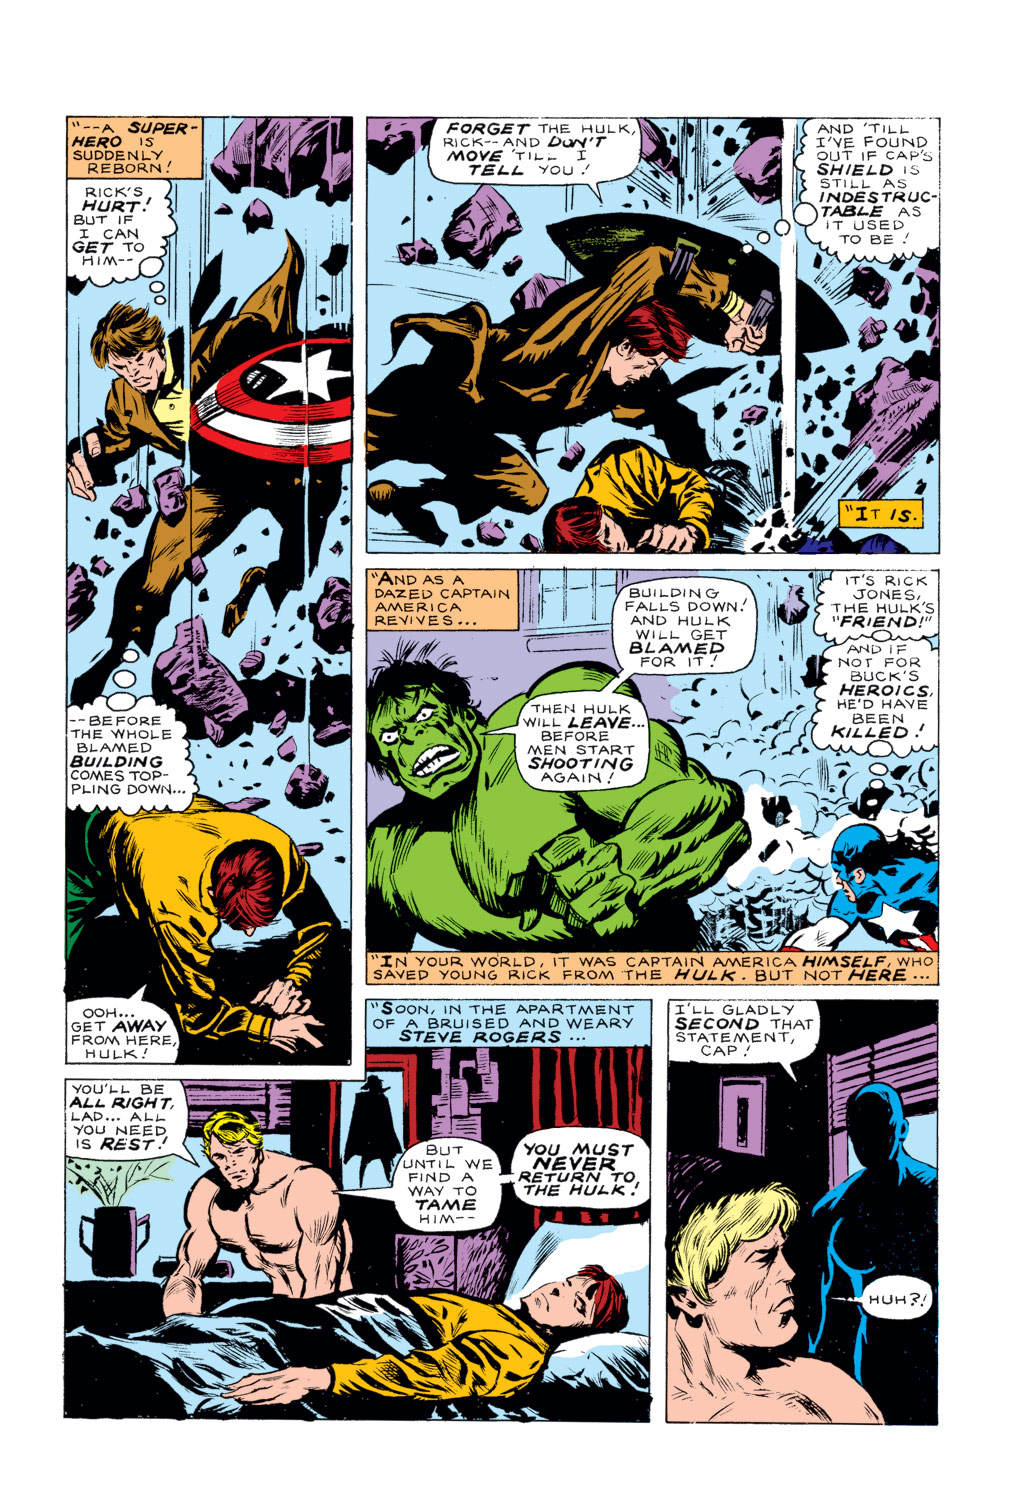 What If? (1977) issue 5 - Captain America hadn't vanished during World War Two - Page 17